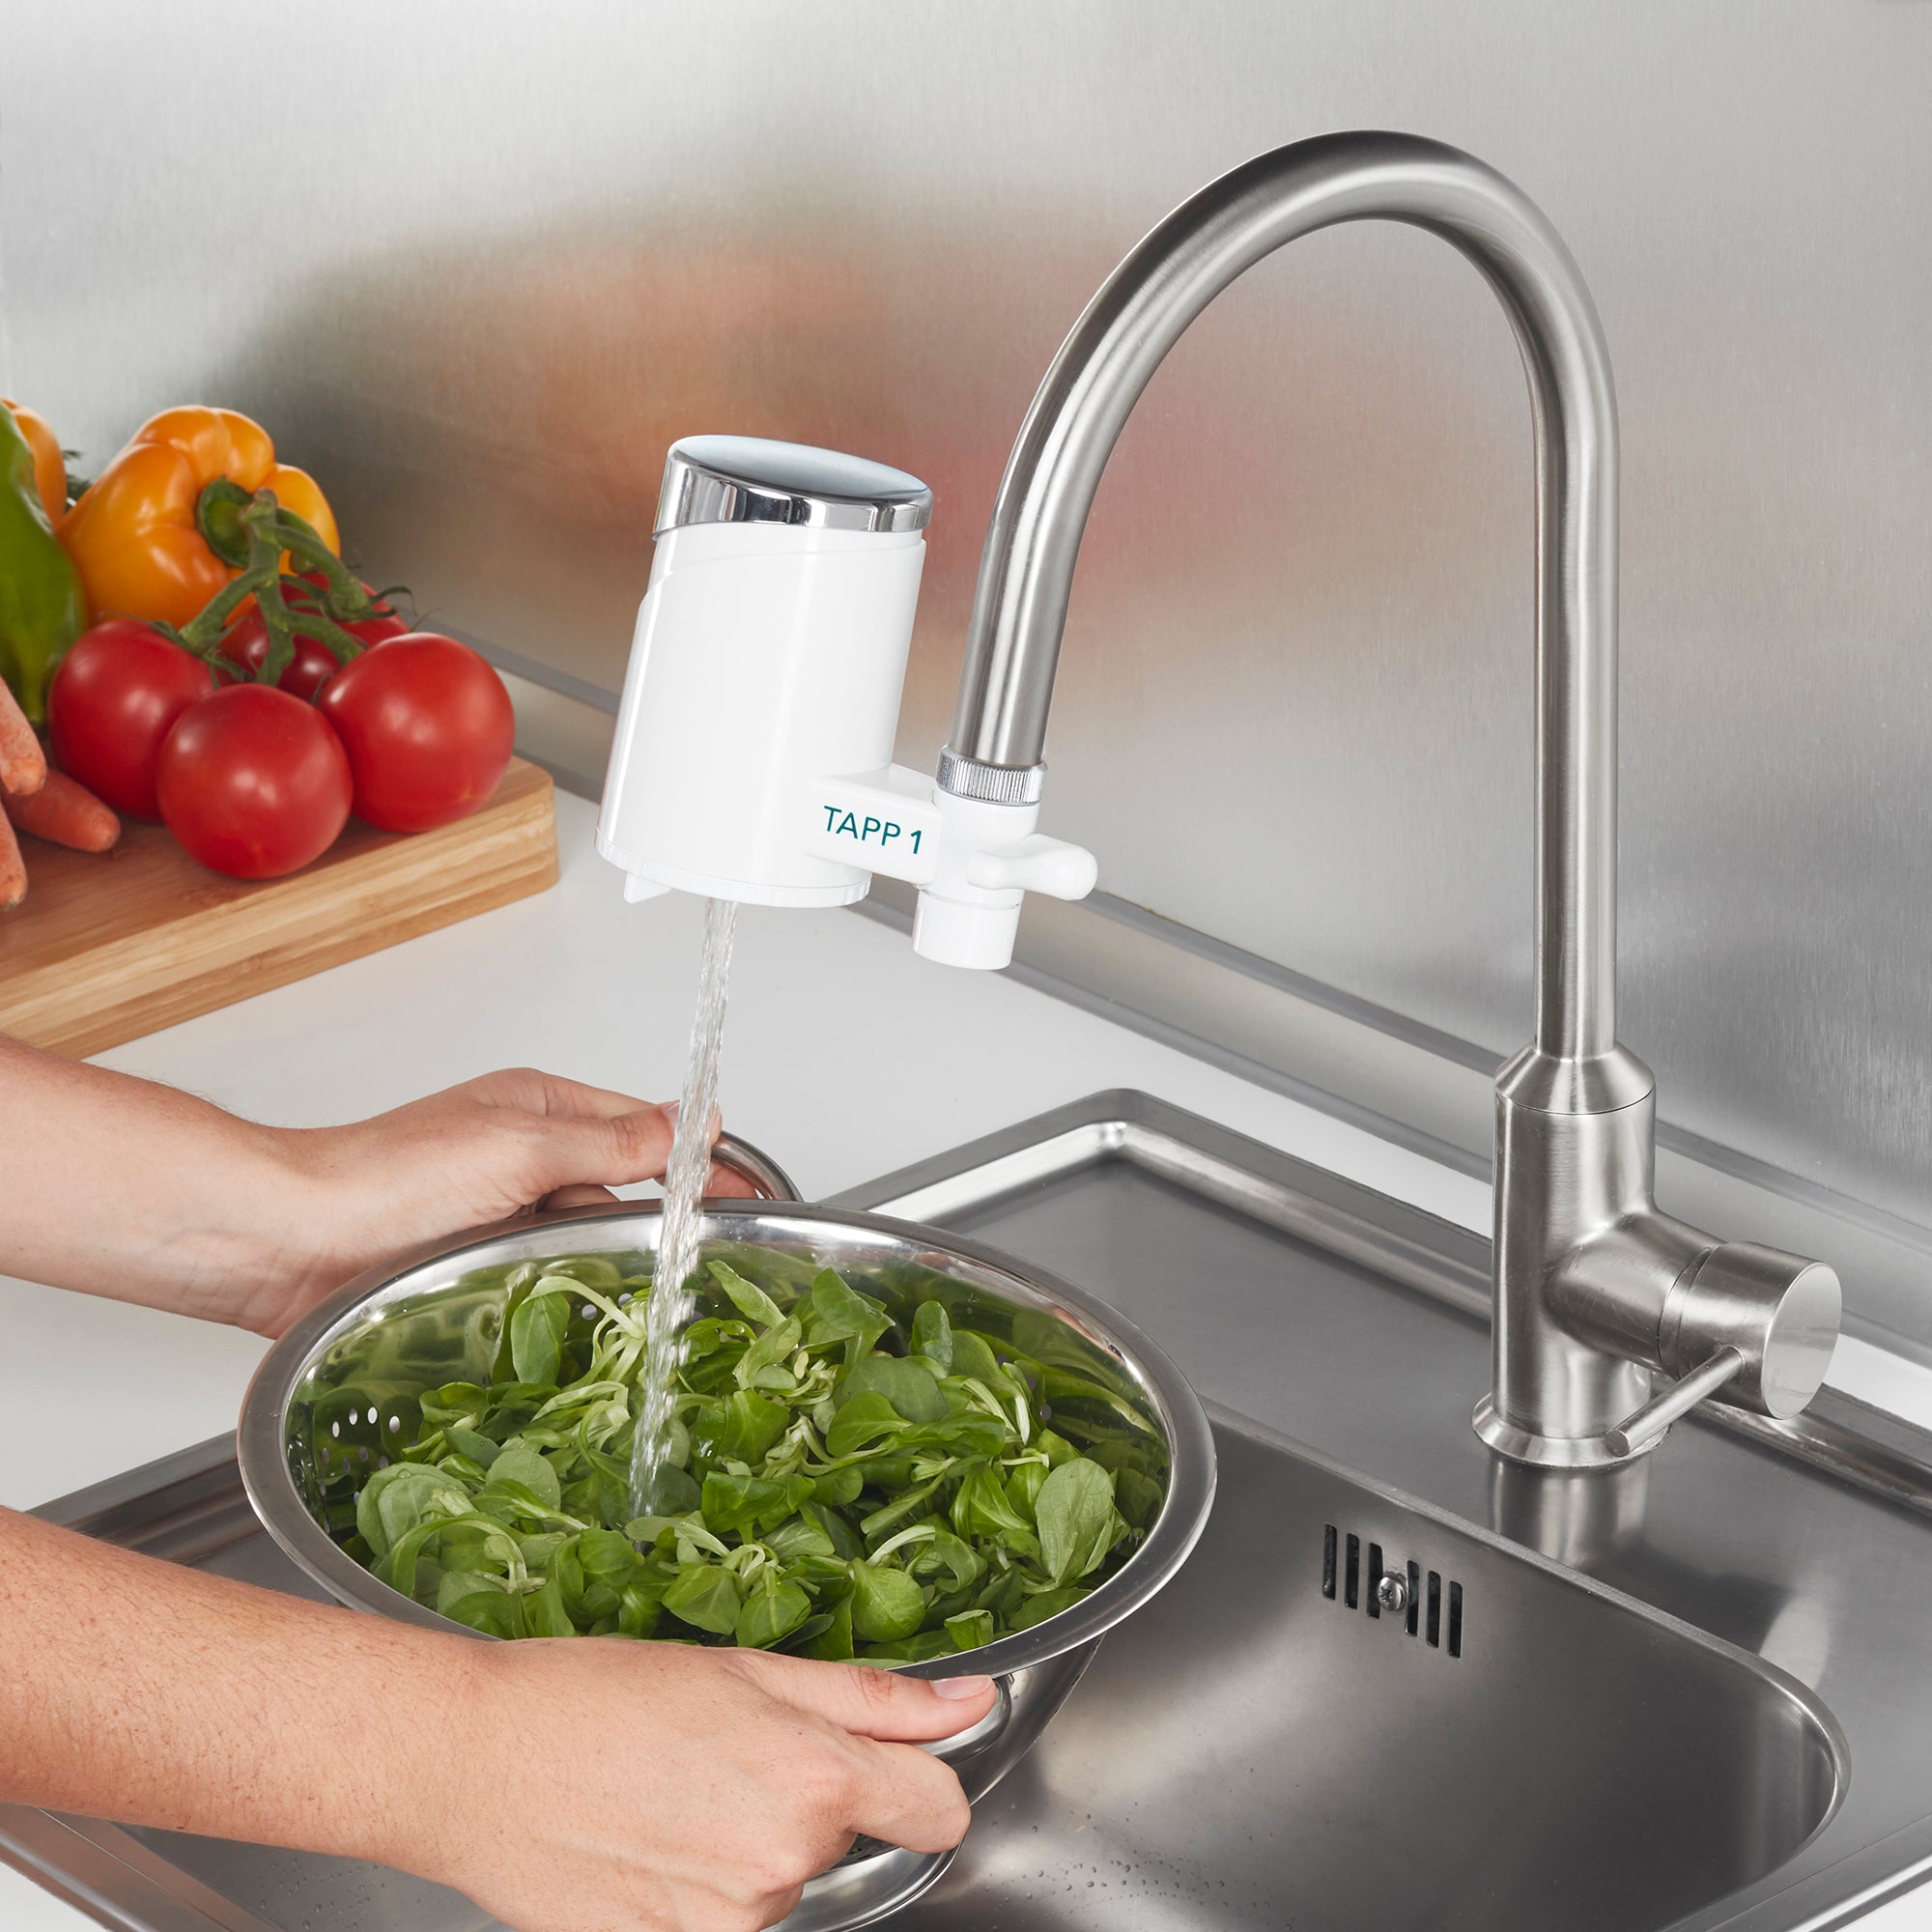 TAPP Ultra Faucet Filter:  High quality faucet water filter with advanced 5-stage filtration technology